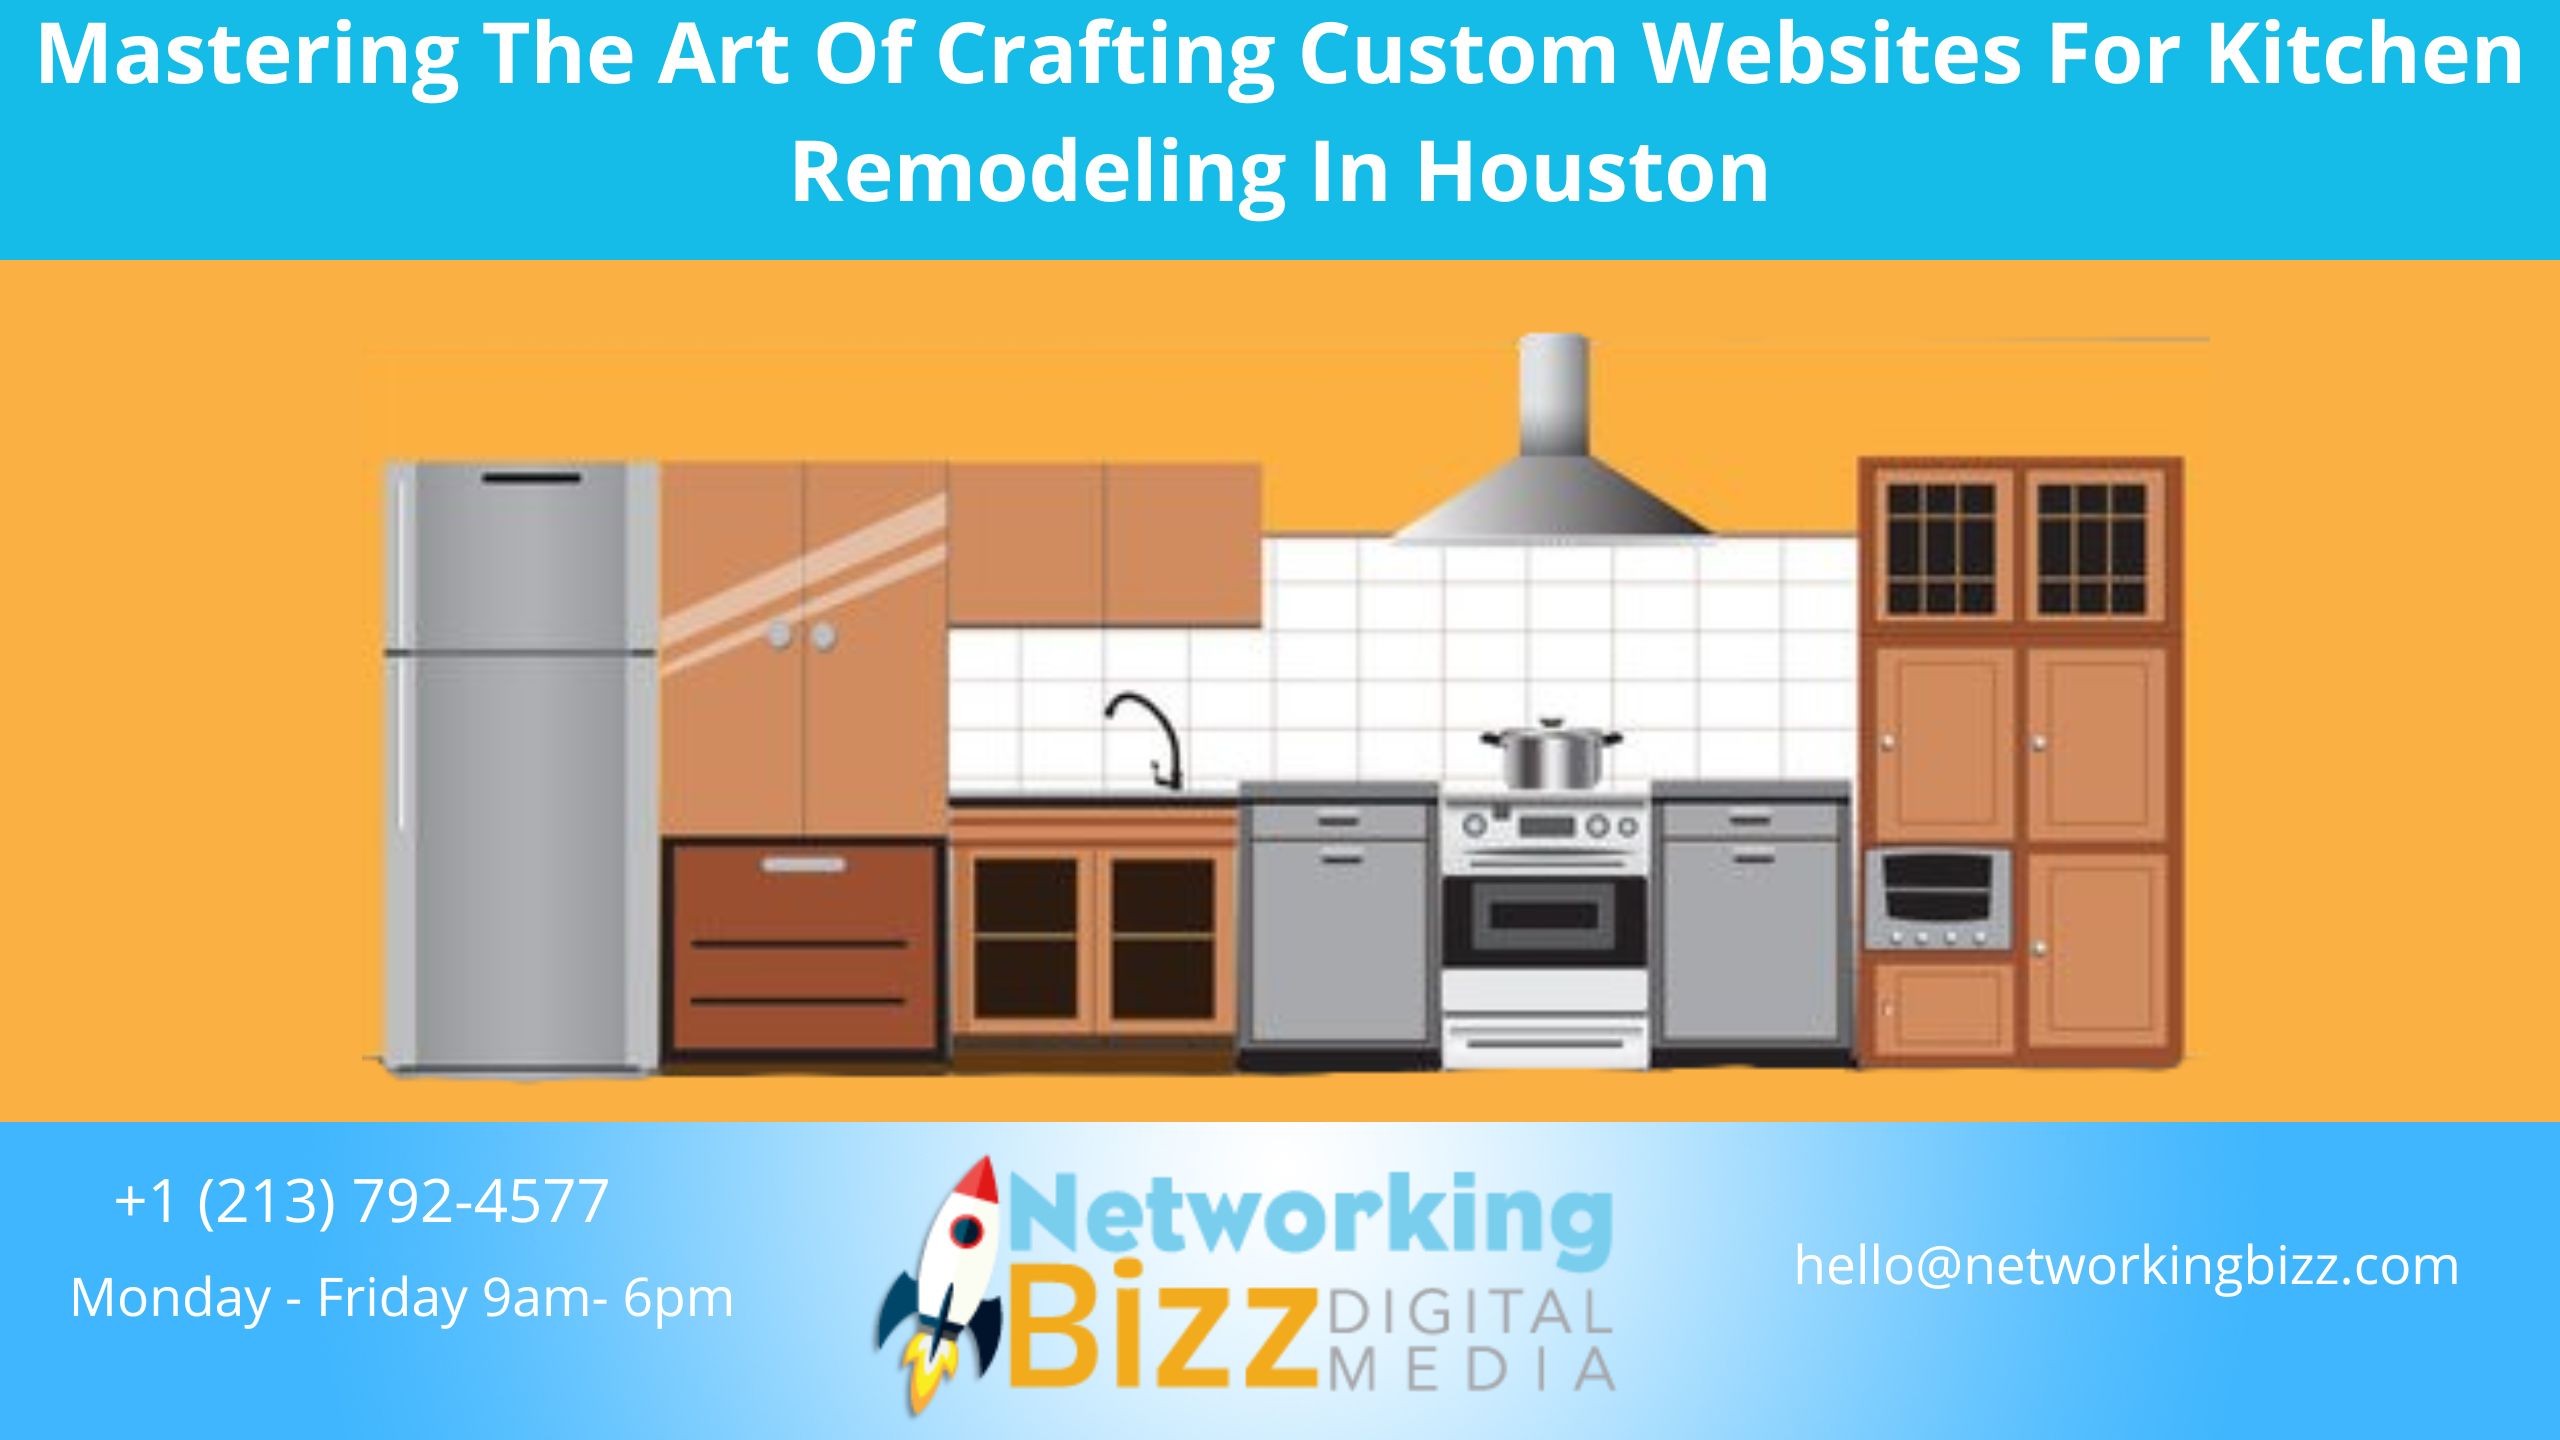 Mastering The Art Of Crafting Custom Websites For Kitchen Remodeling In Houston